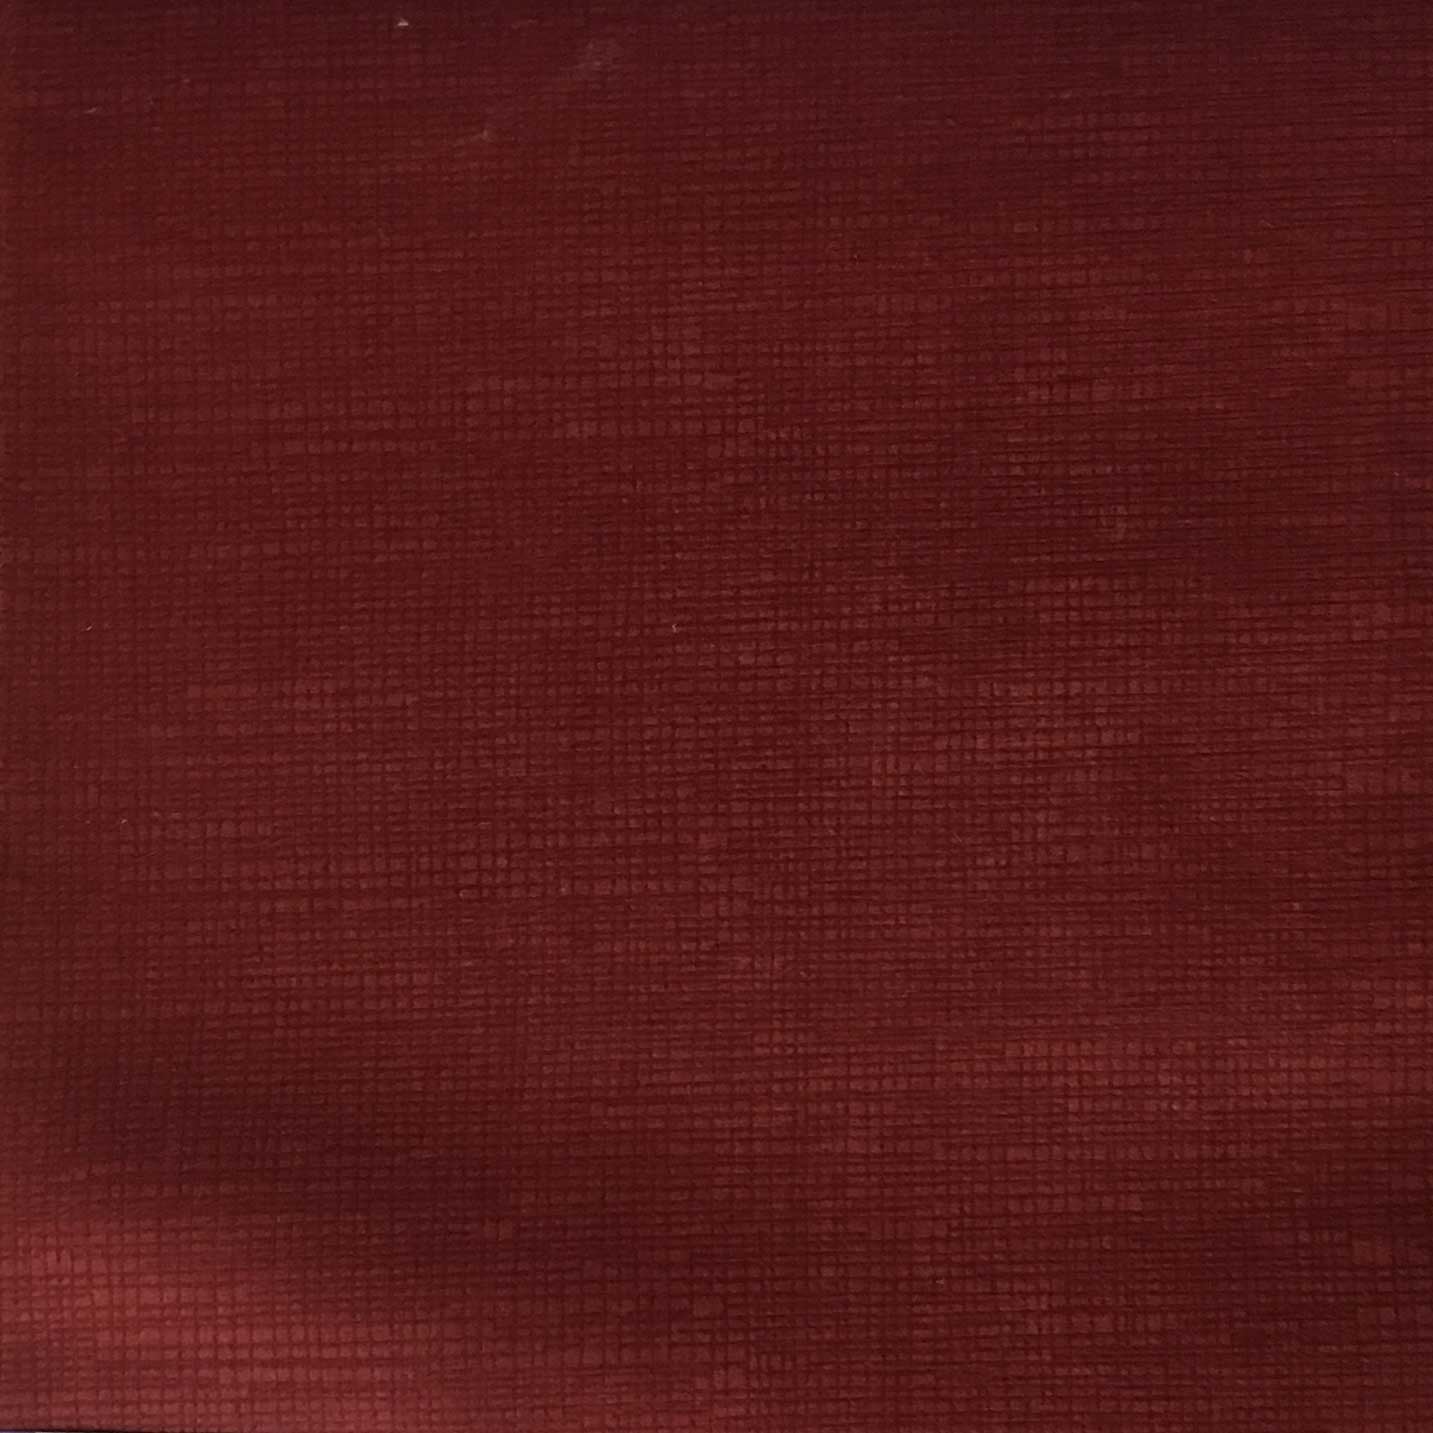 Solid Crinkled Micro Velvet - Red - Fabric by the Yard